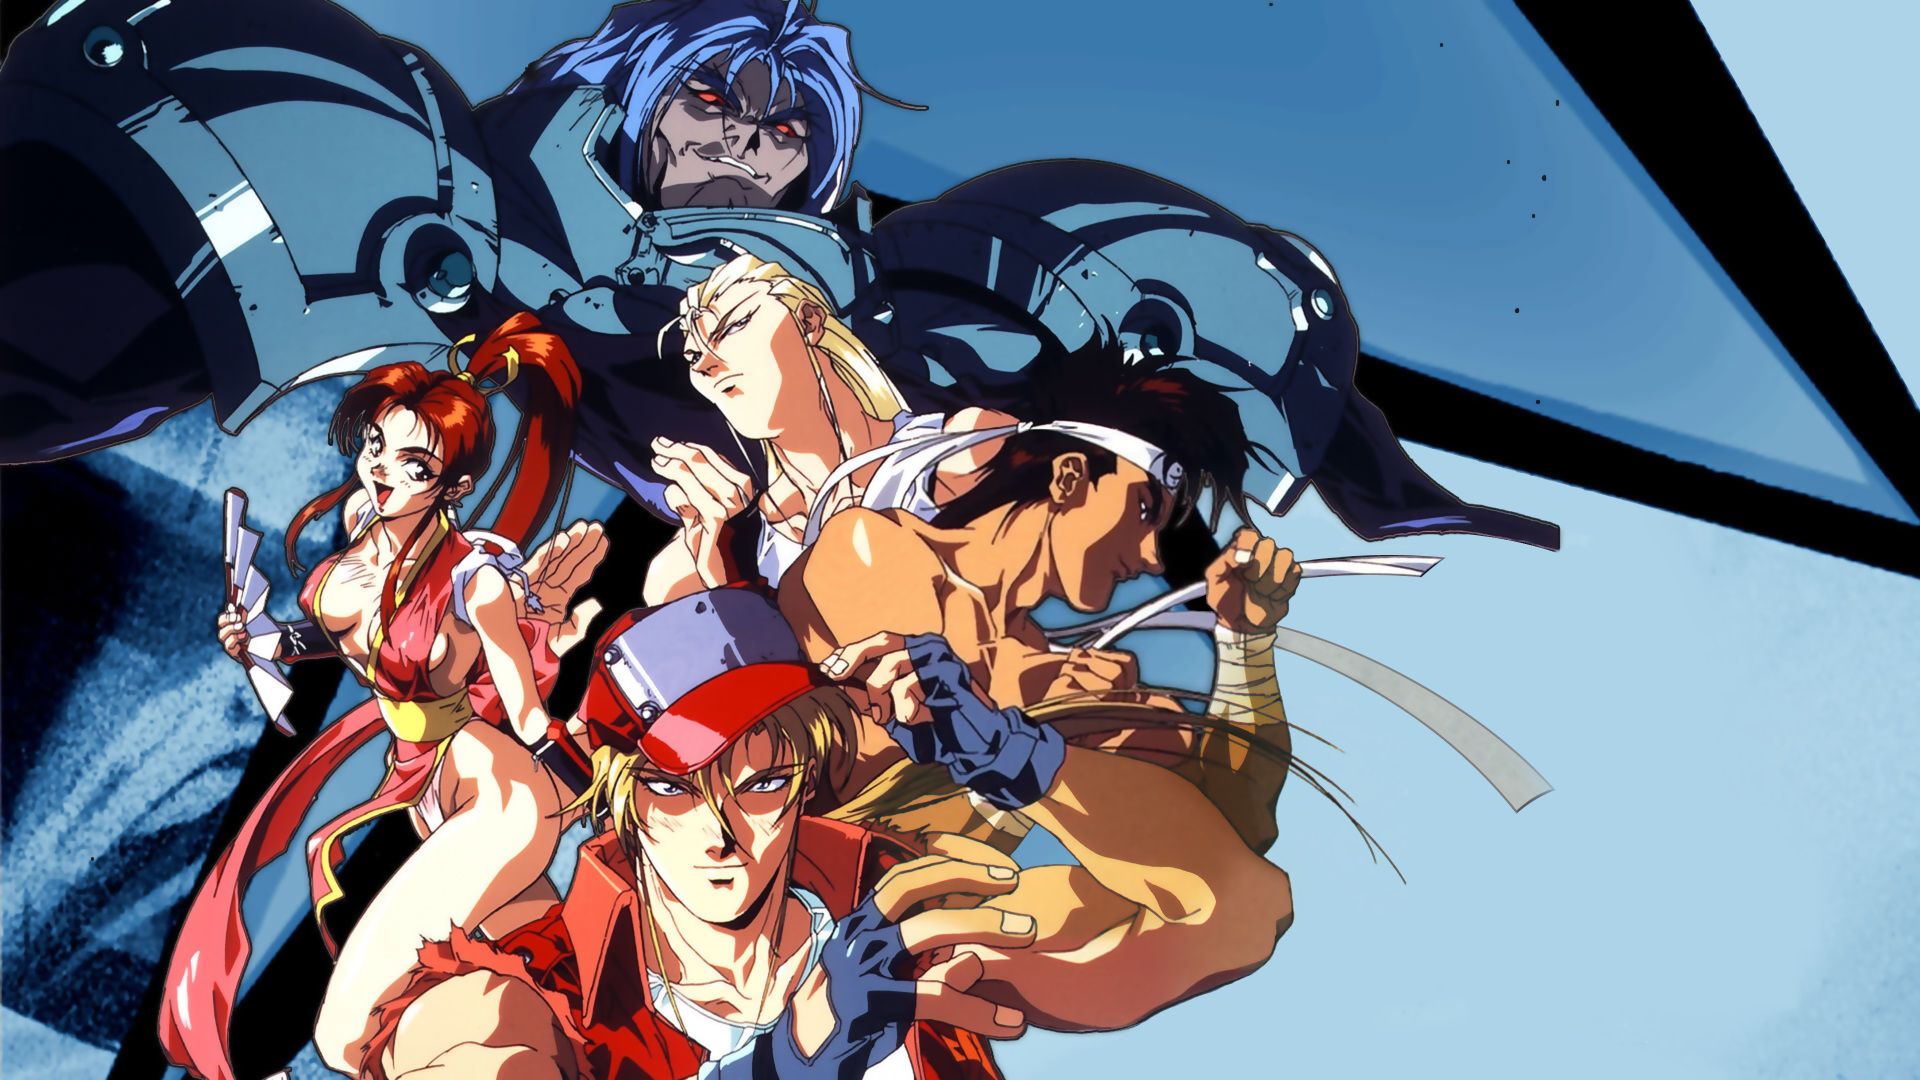 Fatal Fury 2: The New Battle background